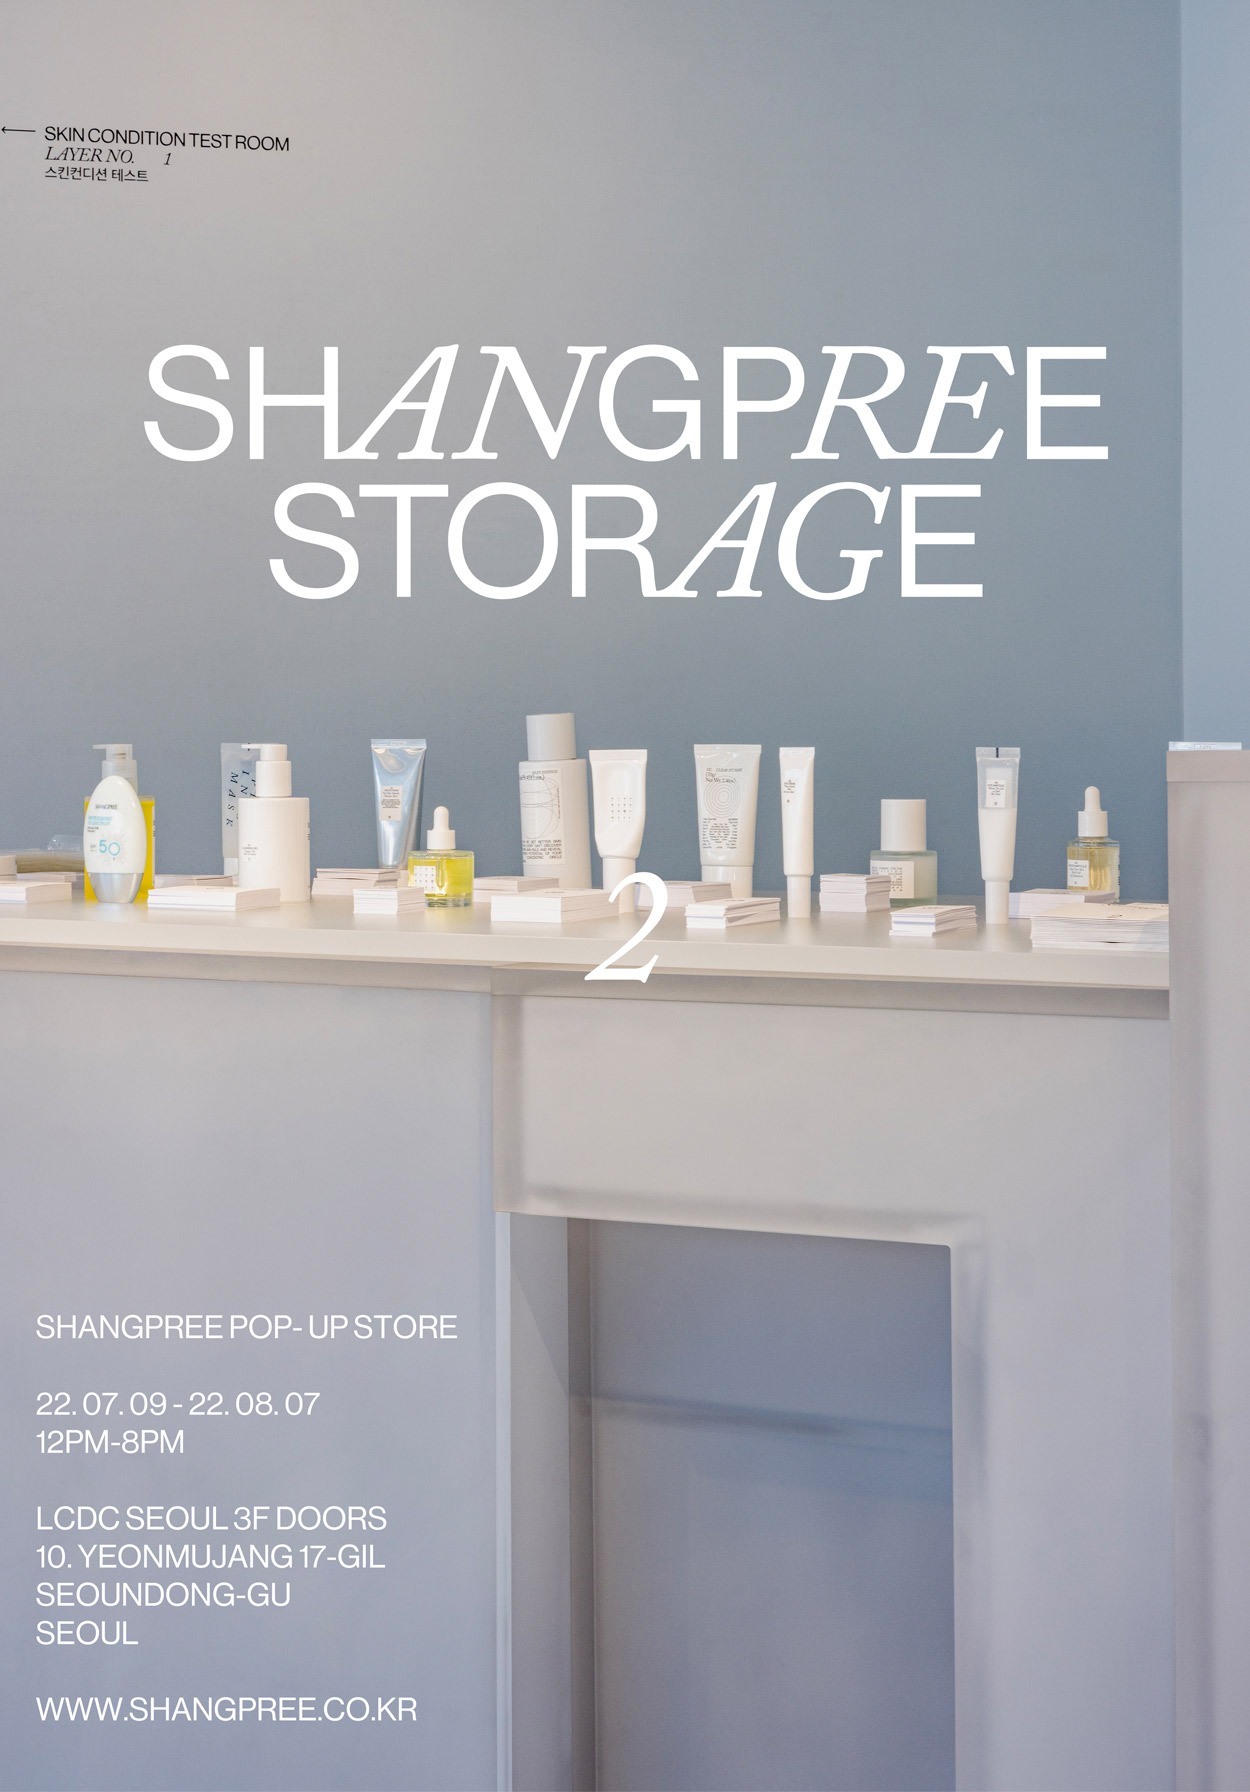 Shangpree Pop-up Store